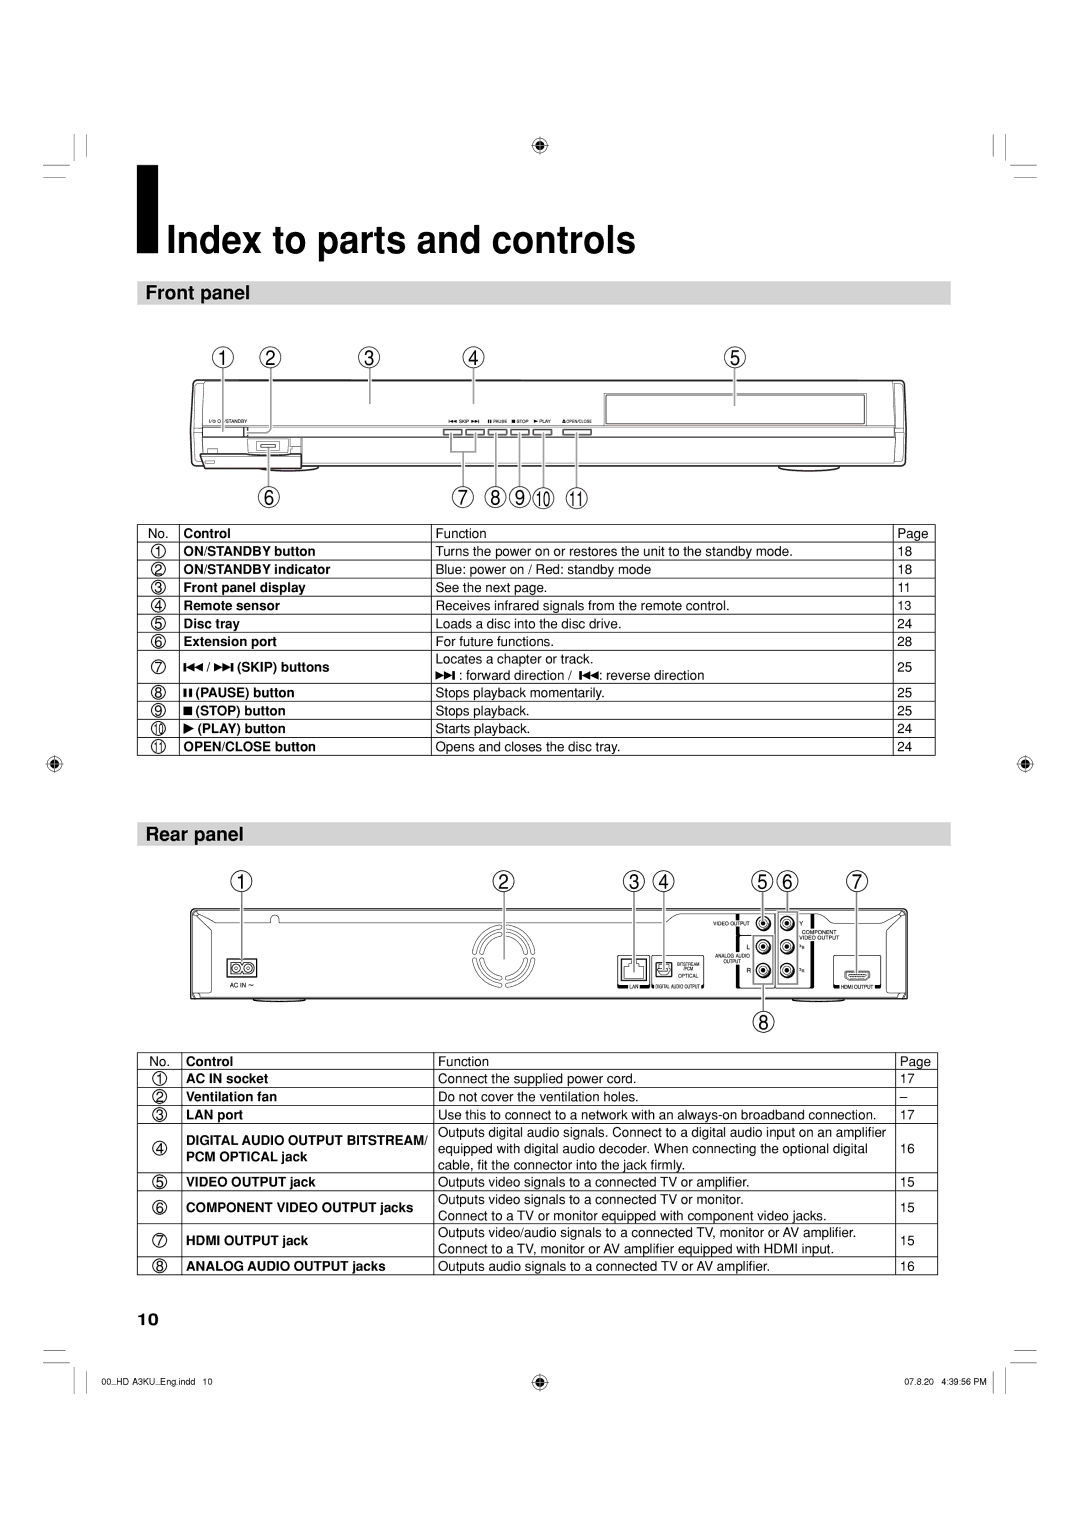 Toshiba HD-A3KC owner manual Index to parts and controls, Front panel, Rear panel 